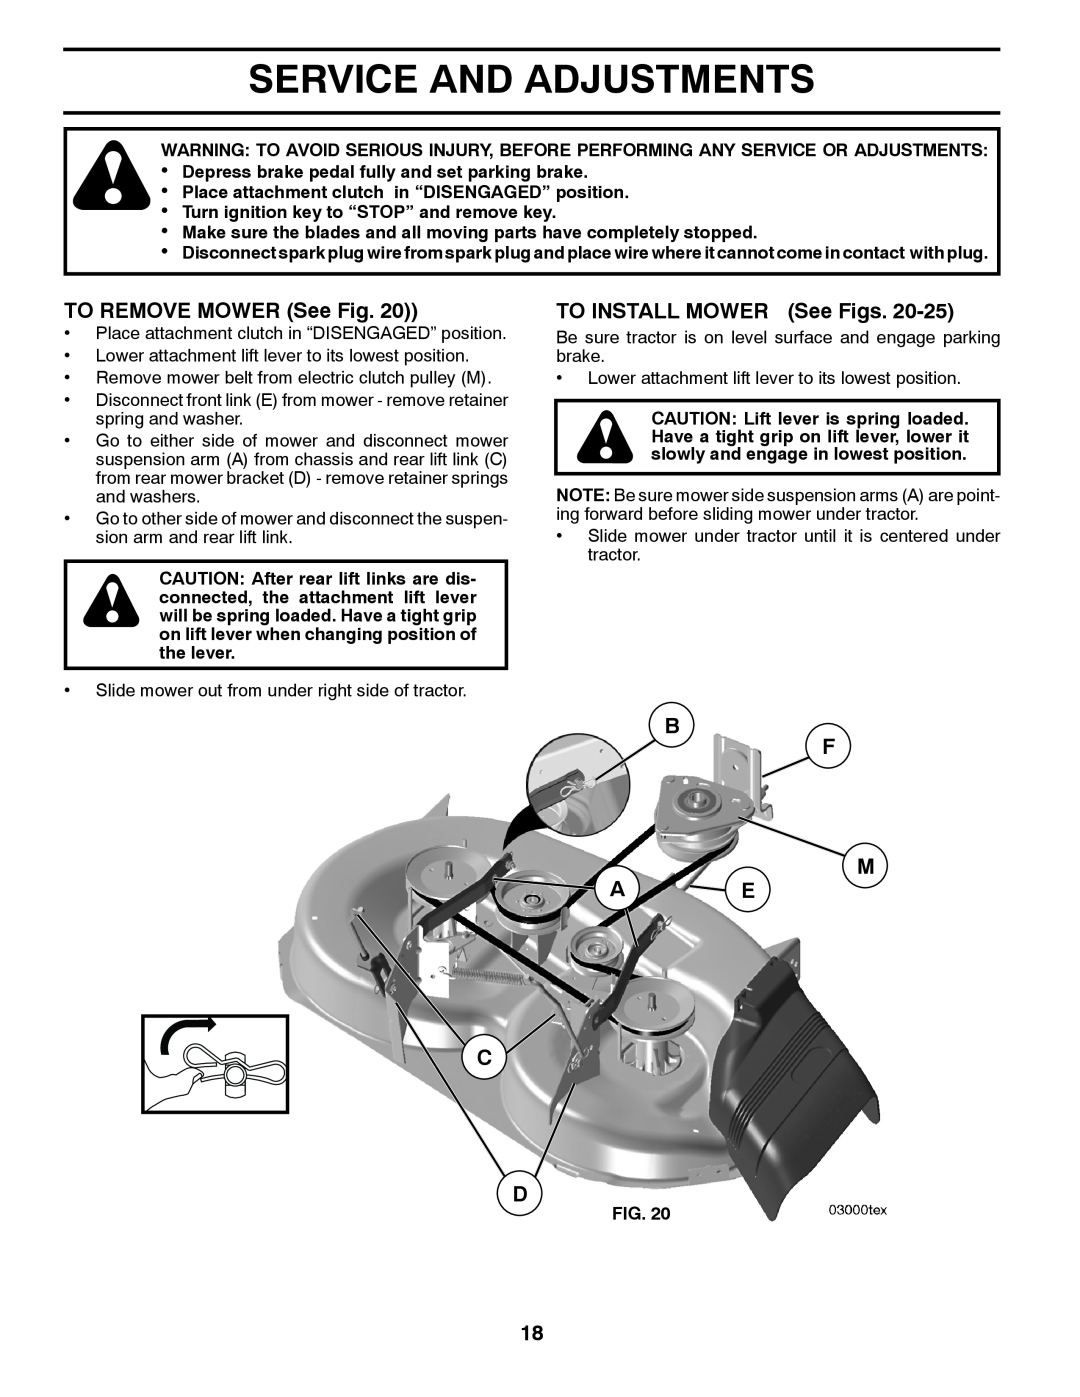 Husqvarna 2146XLS owner manual Service And Adjustments, TO REMOVE MOWER See Fig, TO INSTALL MOWER See Figs, M A E C D 